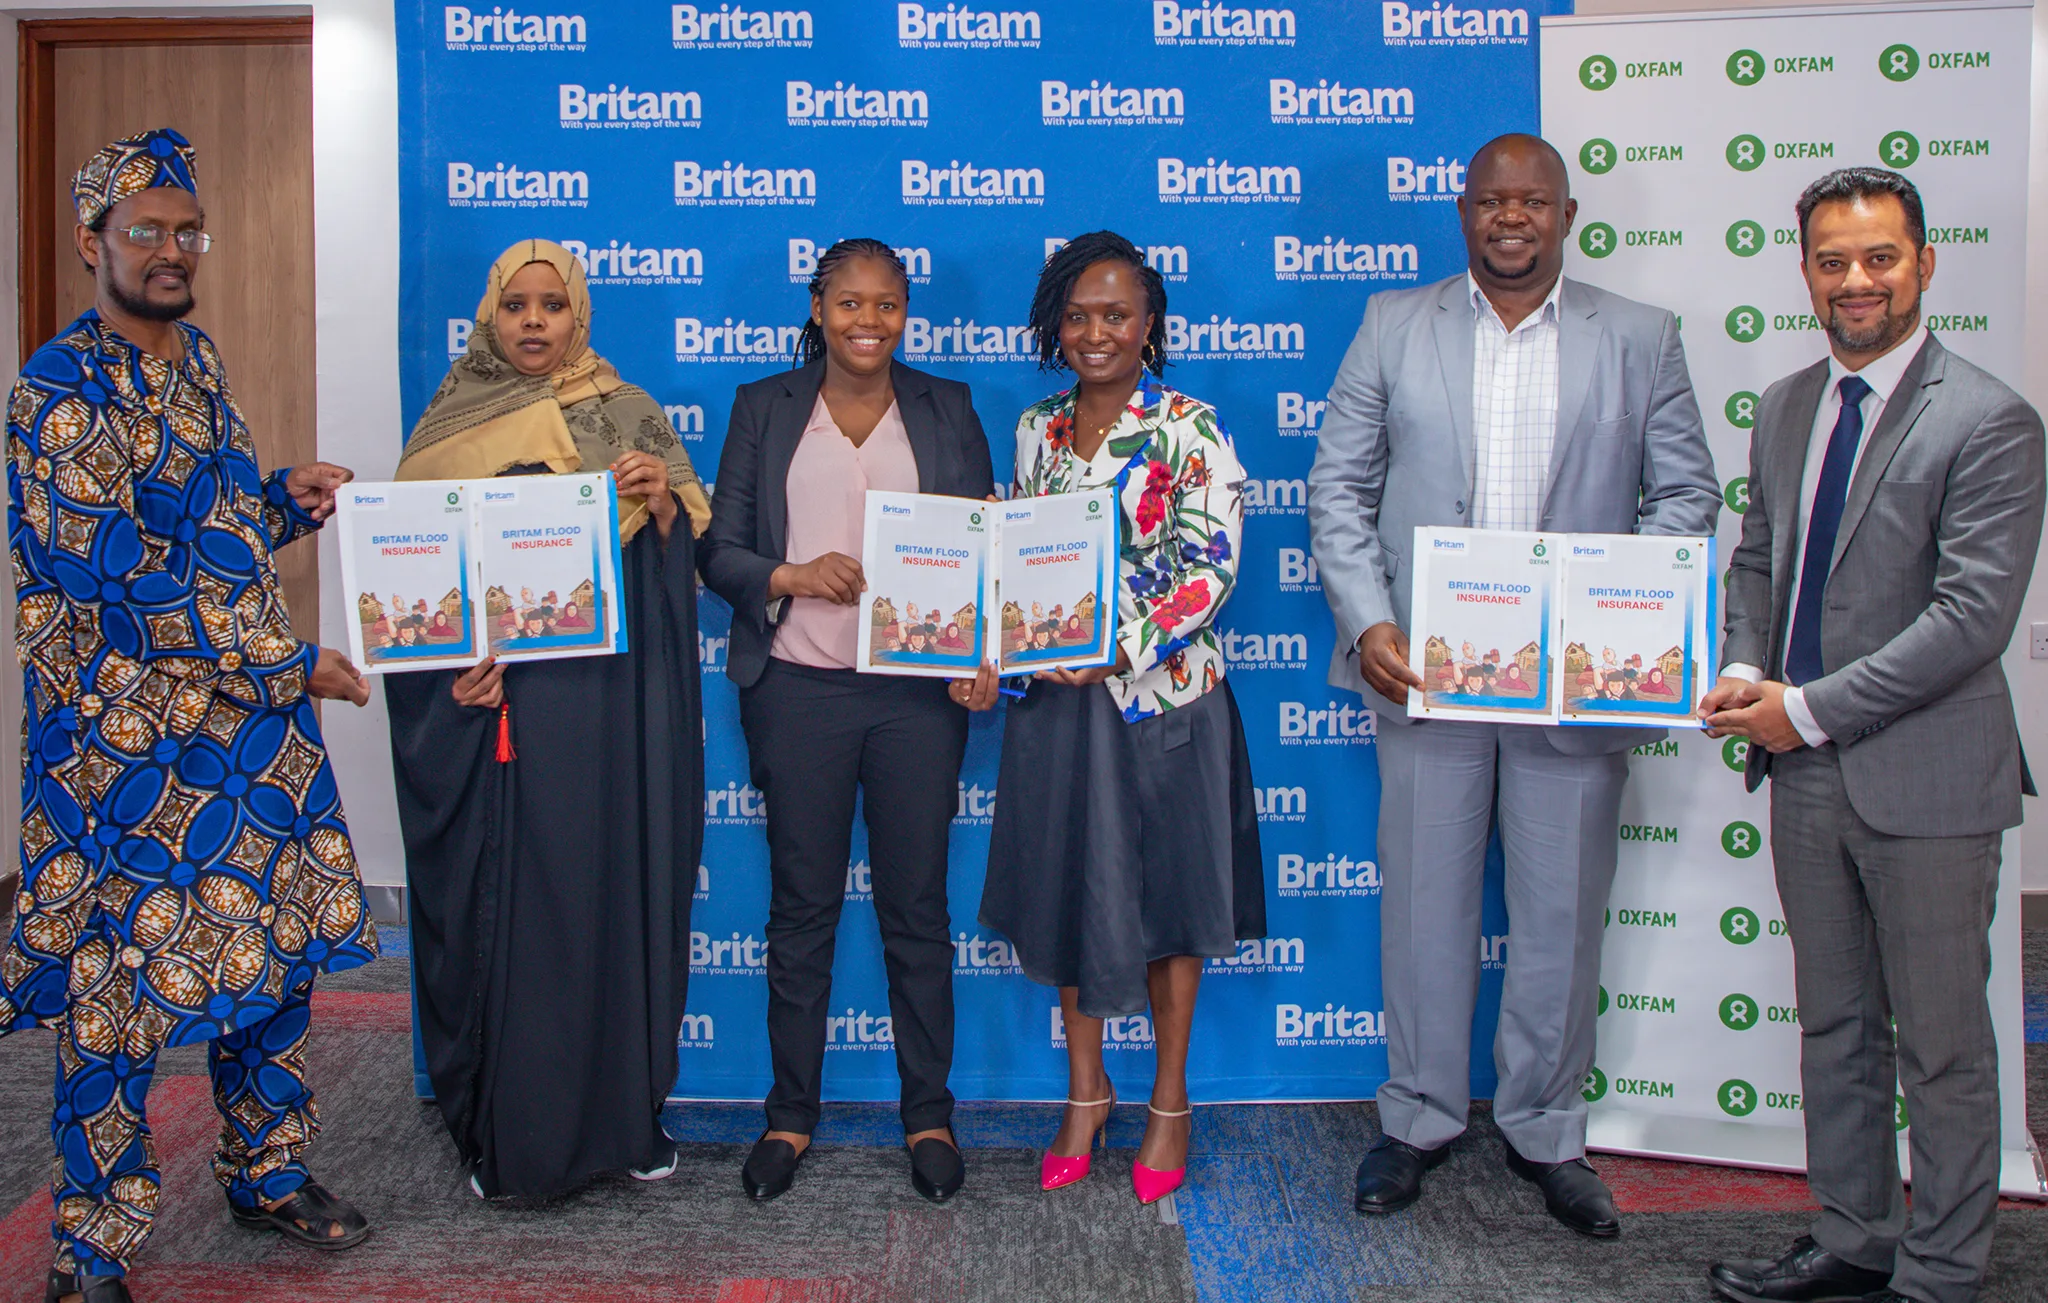 Britam Partners with Swiss Re & Oxfam to launch index-based flood insurance solution